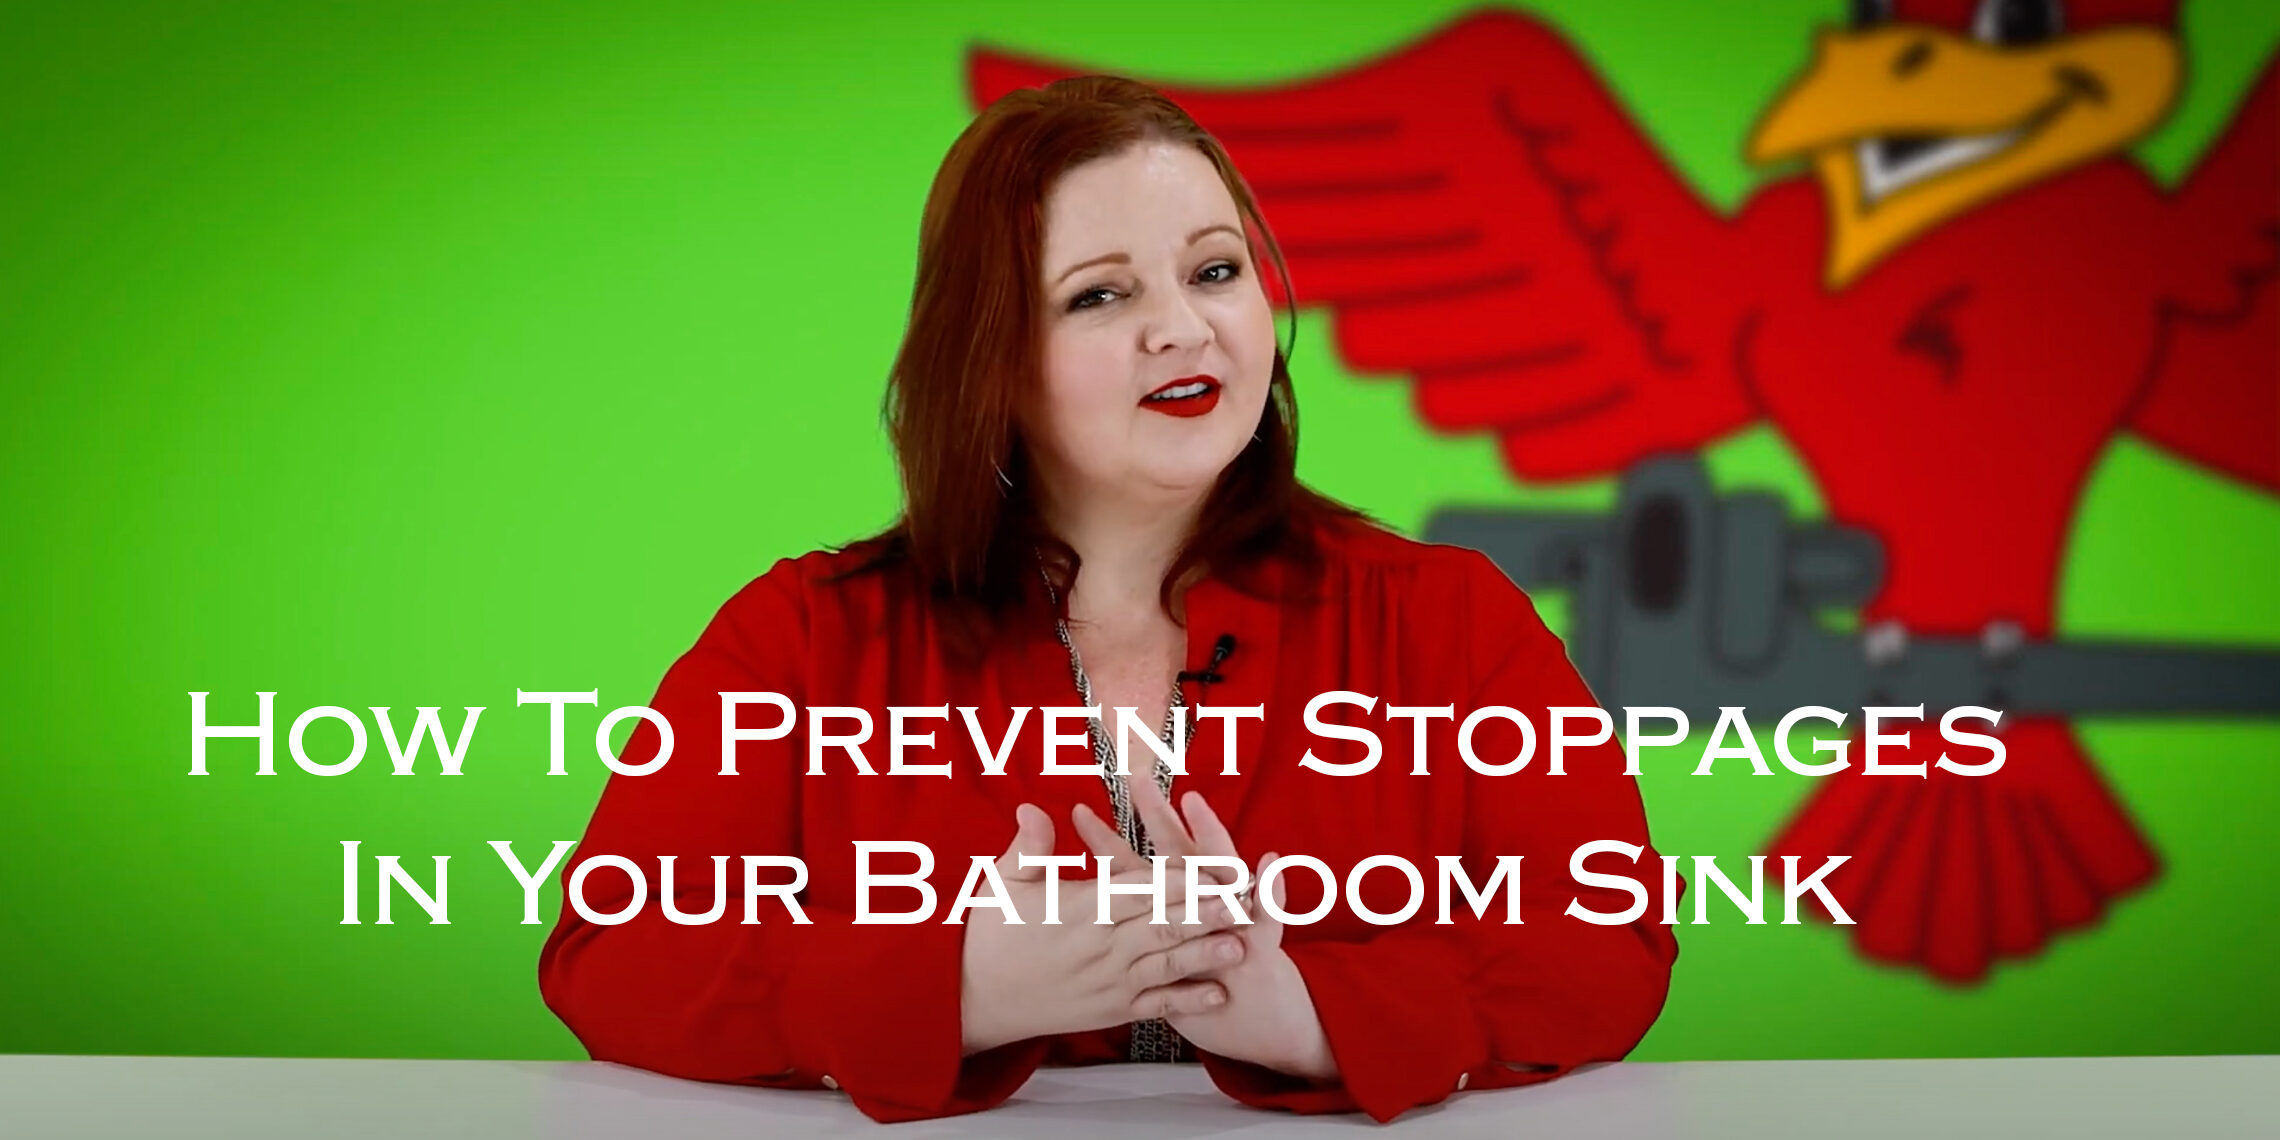 Stephanie Robins, the owner of Robins Plumbing with featured blog titled 'How-To-Prevent-Stoppages-In-Your-Bathroom-Sink'